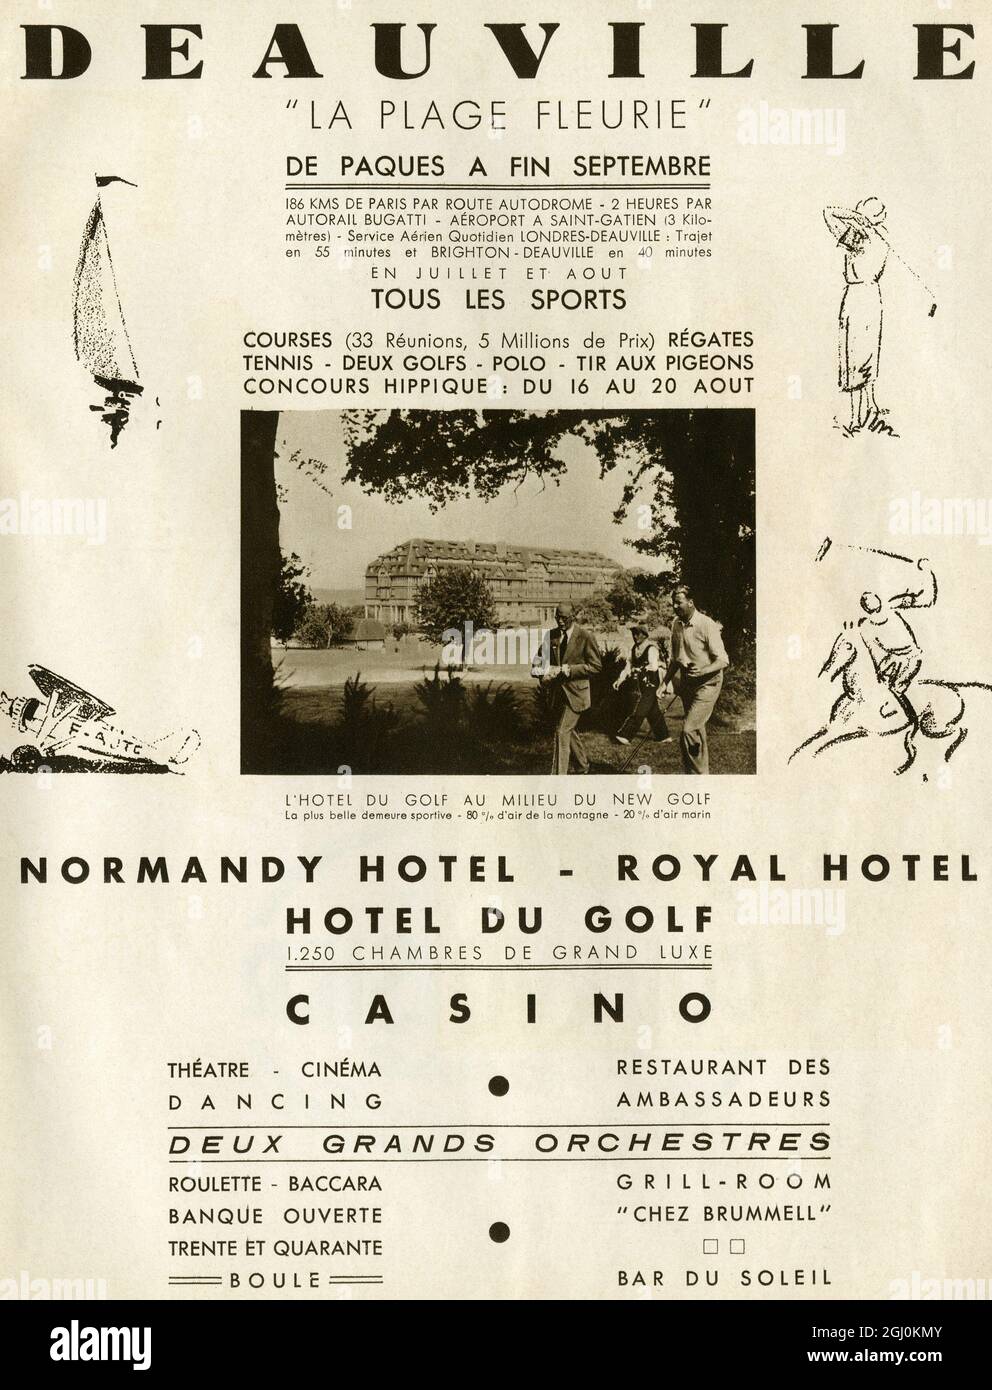 Advertisements for Deauville ''La Plage Fleurie'' - Normandy hotel - Royal Hotel - Hotel du Golf - Casino, etc., etc.,- at the back of the book entitled Folies Bergere 1938 - Folie en Fleurs presented by M. Paul Derval. The Folies Bergère is a Parisian music hall which was at the height of its fame and popularity from the 1890s through the 1920s. It opened on 2 May 1869 as the Folies Trévise and, as of 2008, the institution is still in business. ©TopFoto Stock Photo